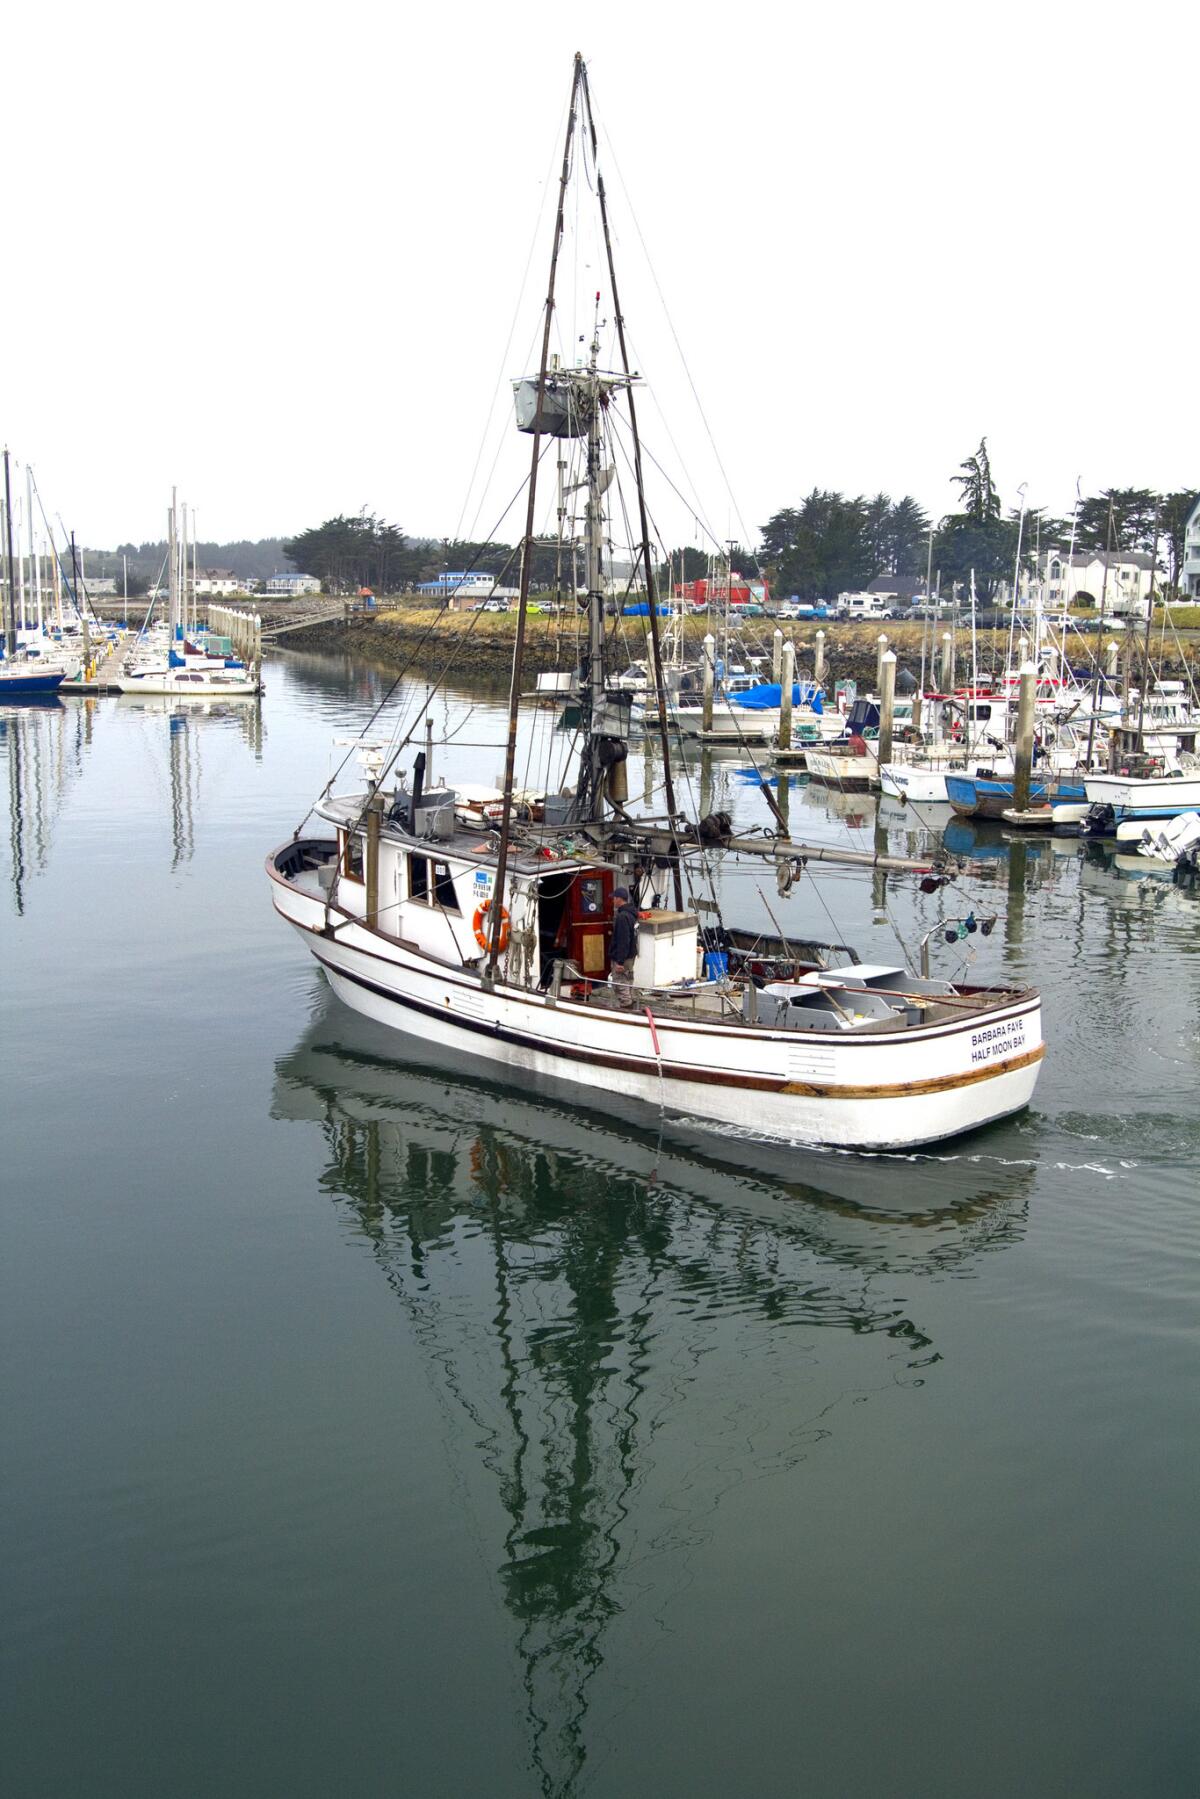 California commercial fishers should not pay less than out-of-state companies, a federal appeals court ruled.